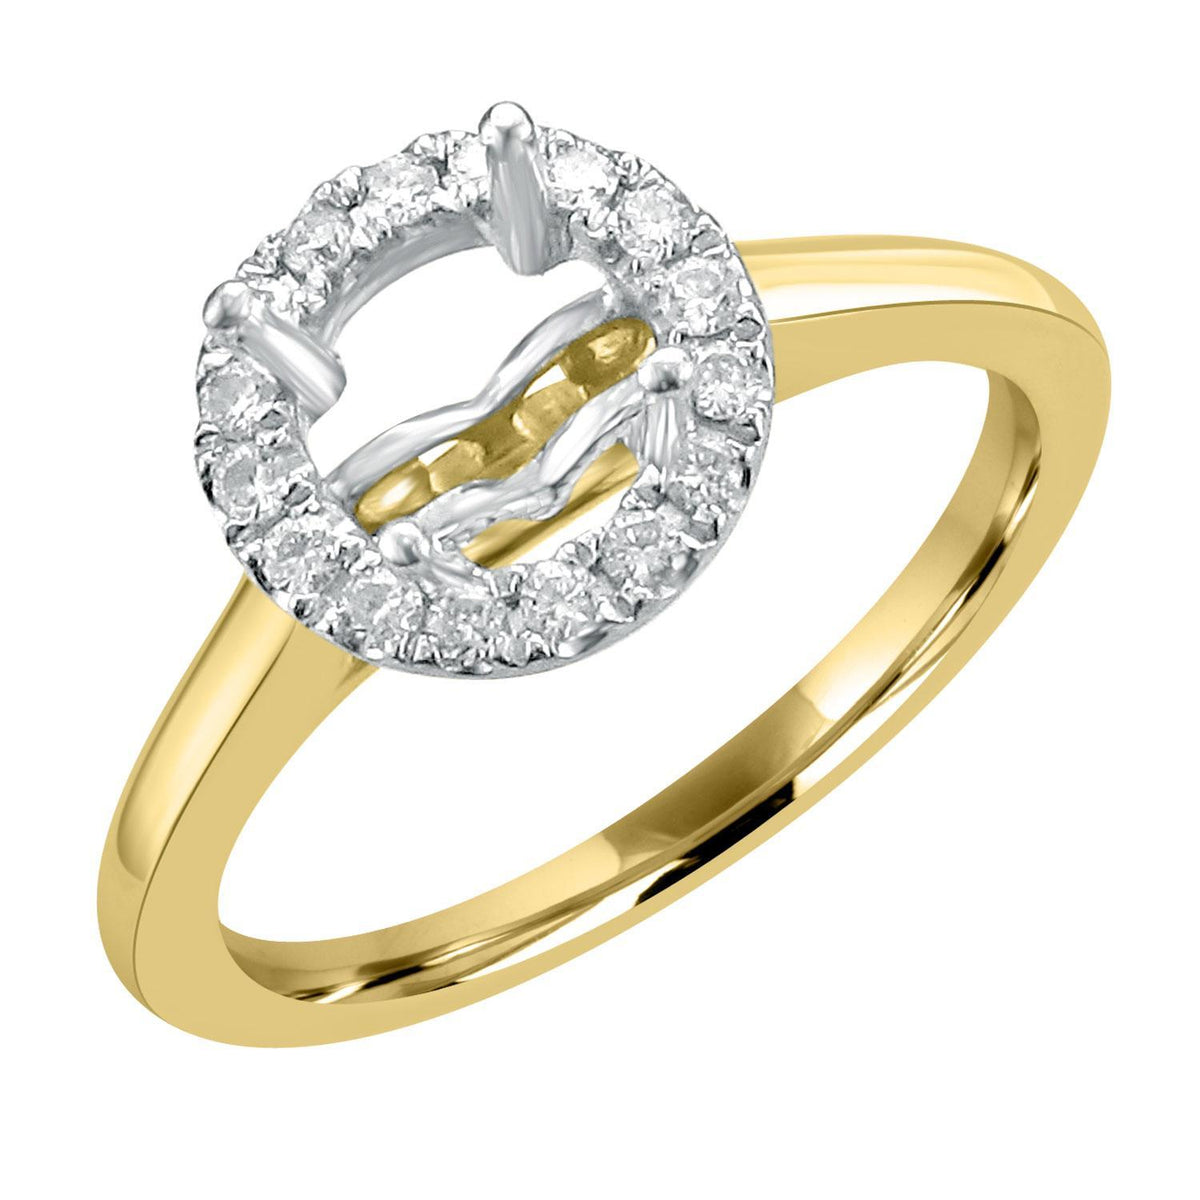 14KT Two-Tone Gold .16 CTW Halo Setting for .75-1.25 CT Round Diamond 4,4.5,5,5.5,6,6.5,7,7.5,8,8.5,9